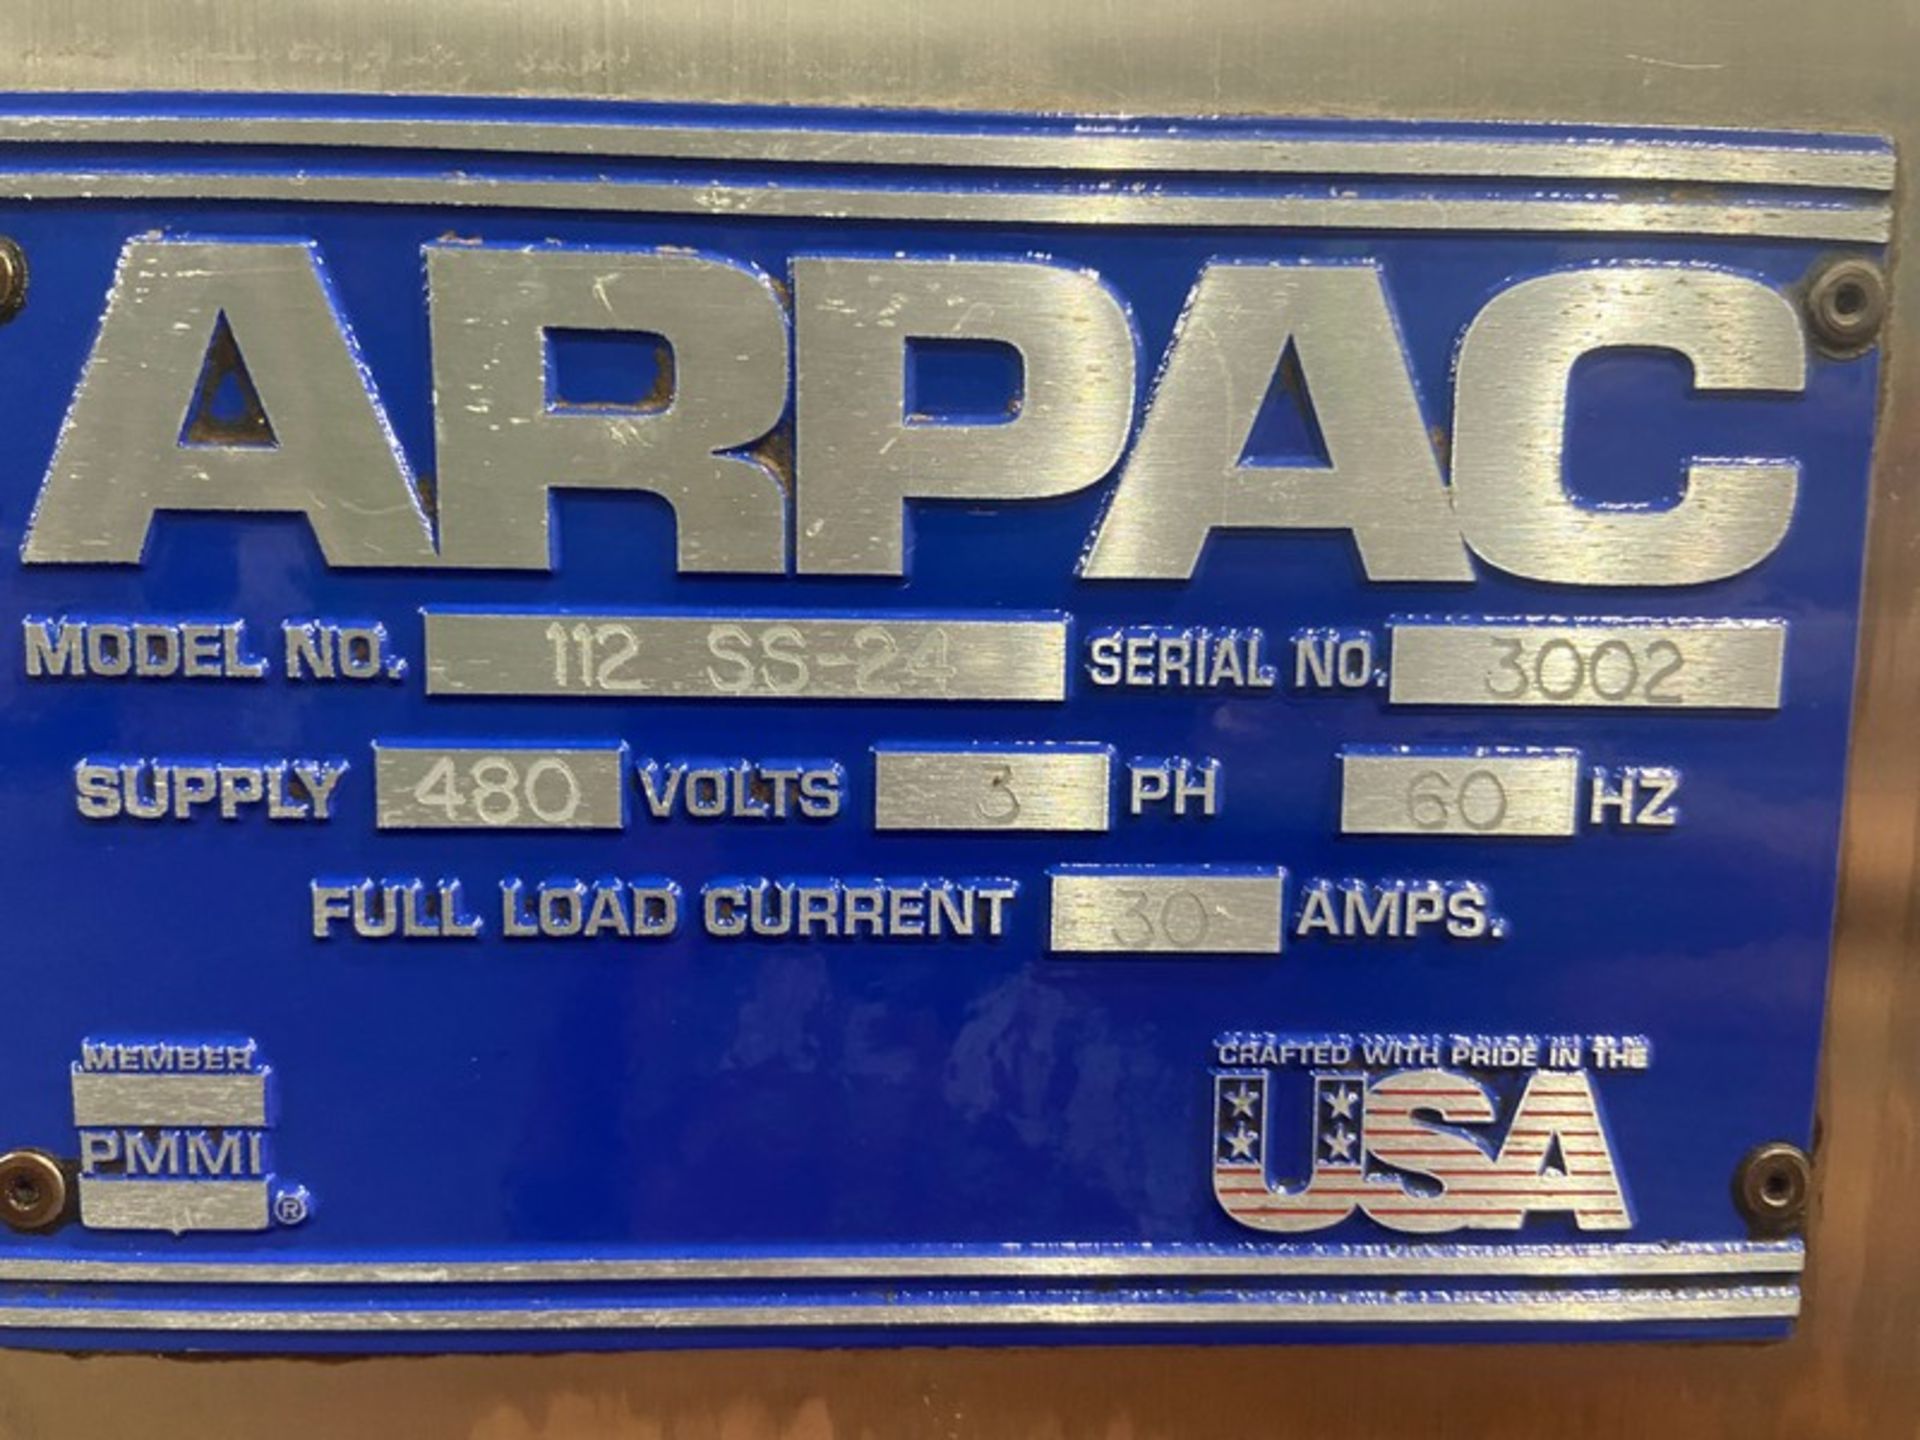 ARPAC S/S Shrink Bundler,-M/N 112 SS-24, S/N 3002, 480 Volts, 3 Phase, with Aprox. 15" W DIscharge - Image 10 of 14